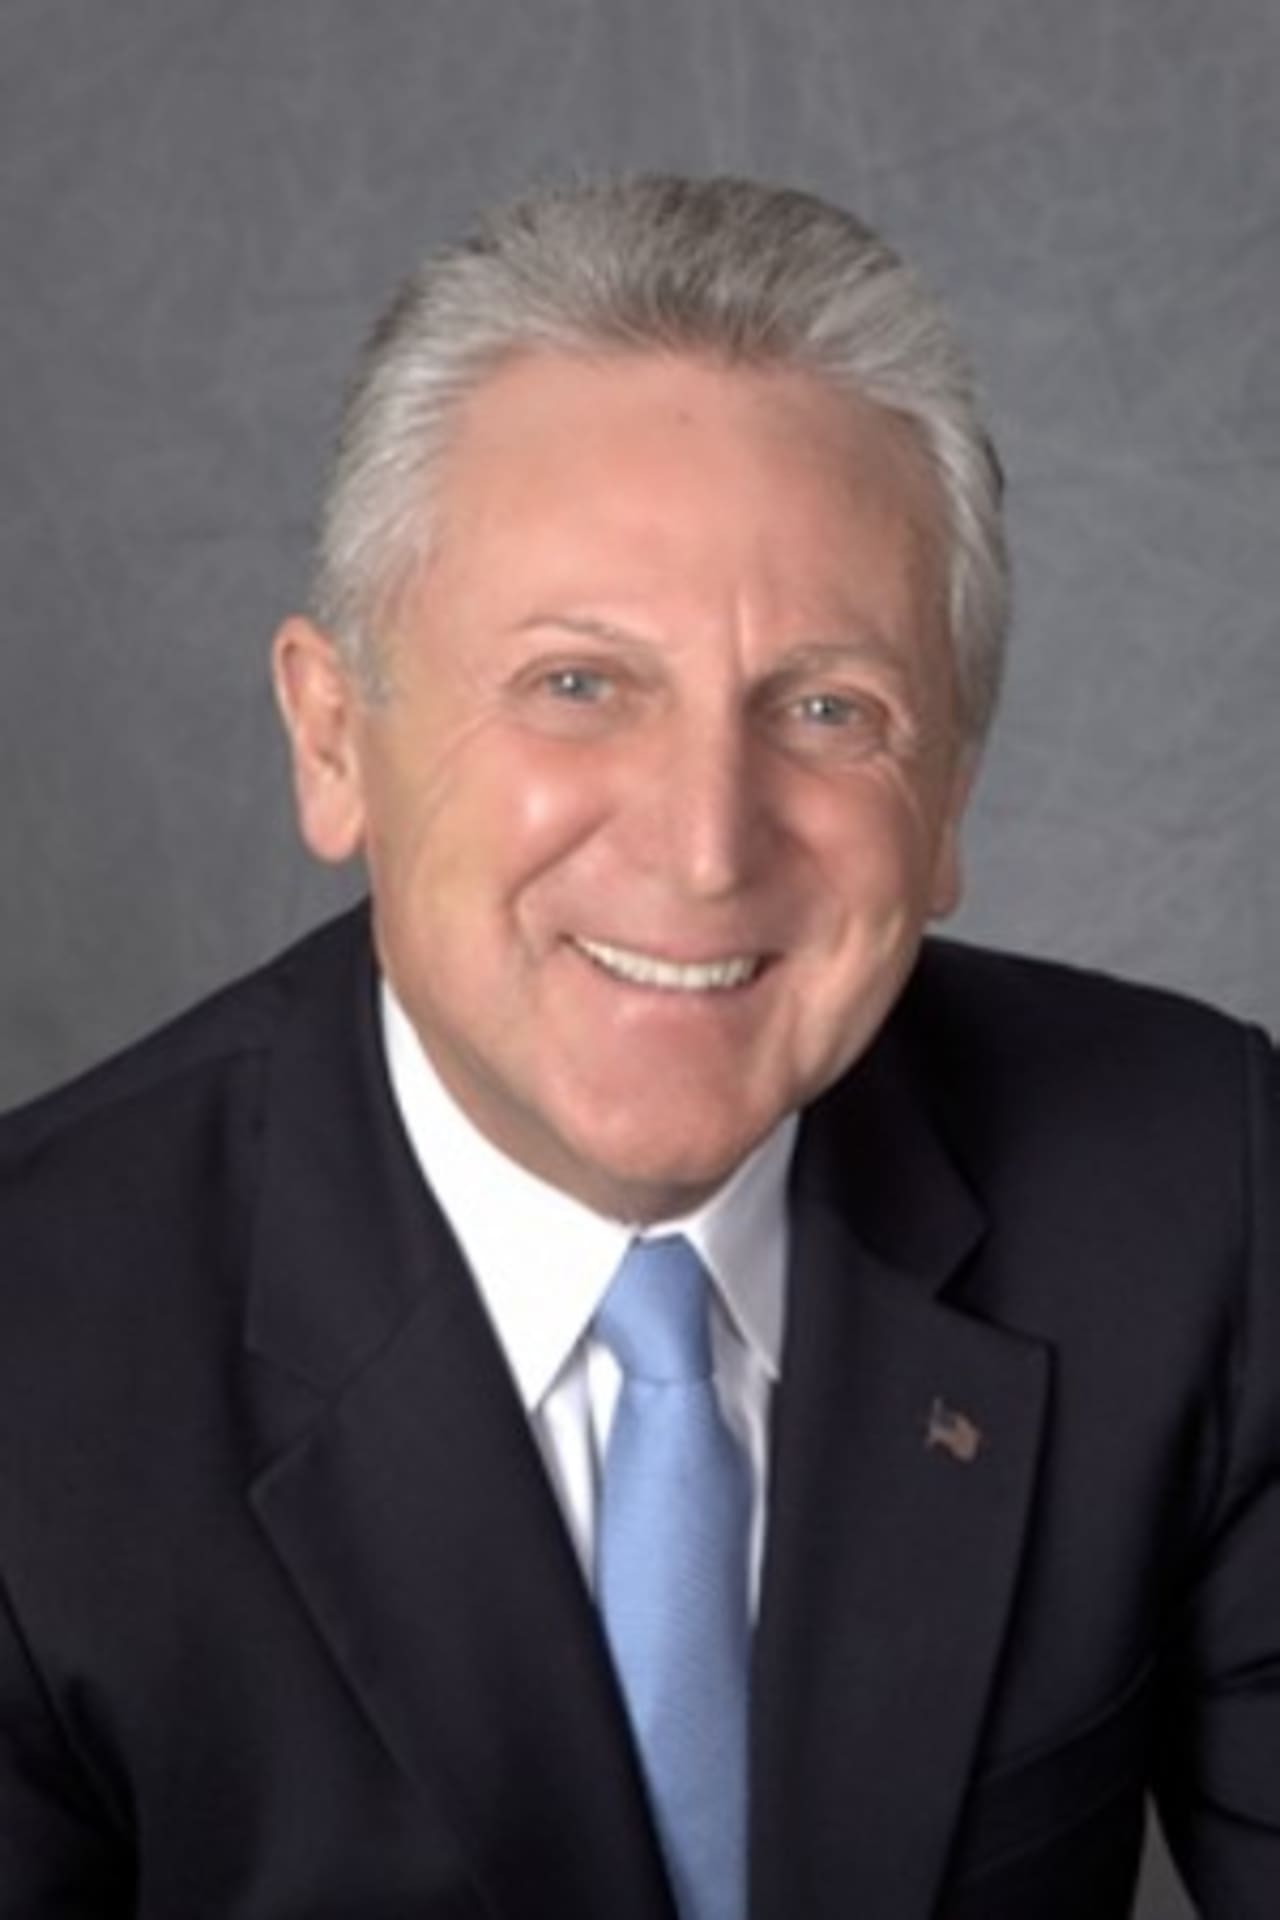 Norwalk Mayor Harry Rilling and his wife, Lucia, are kicking off the citys first Mayors Fitness Challenge Saturday